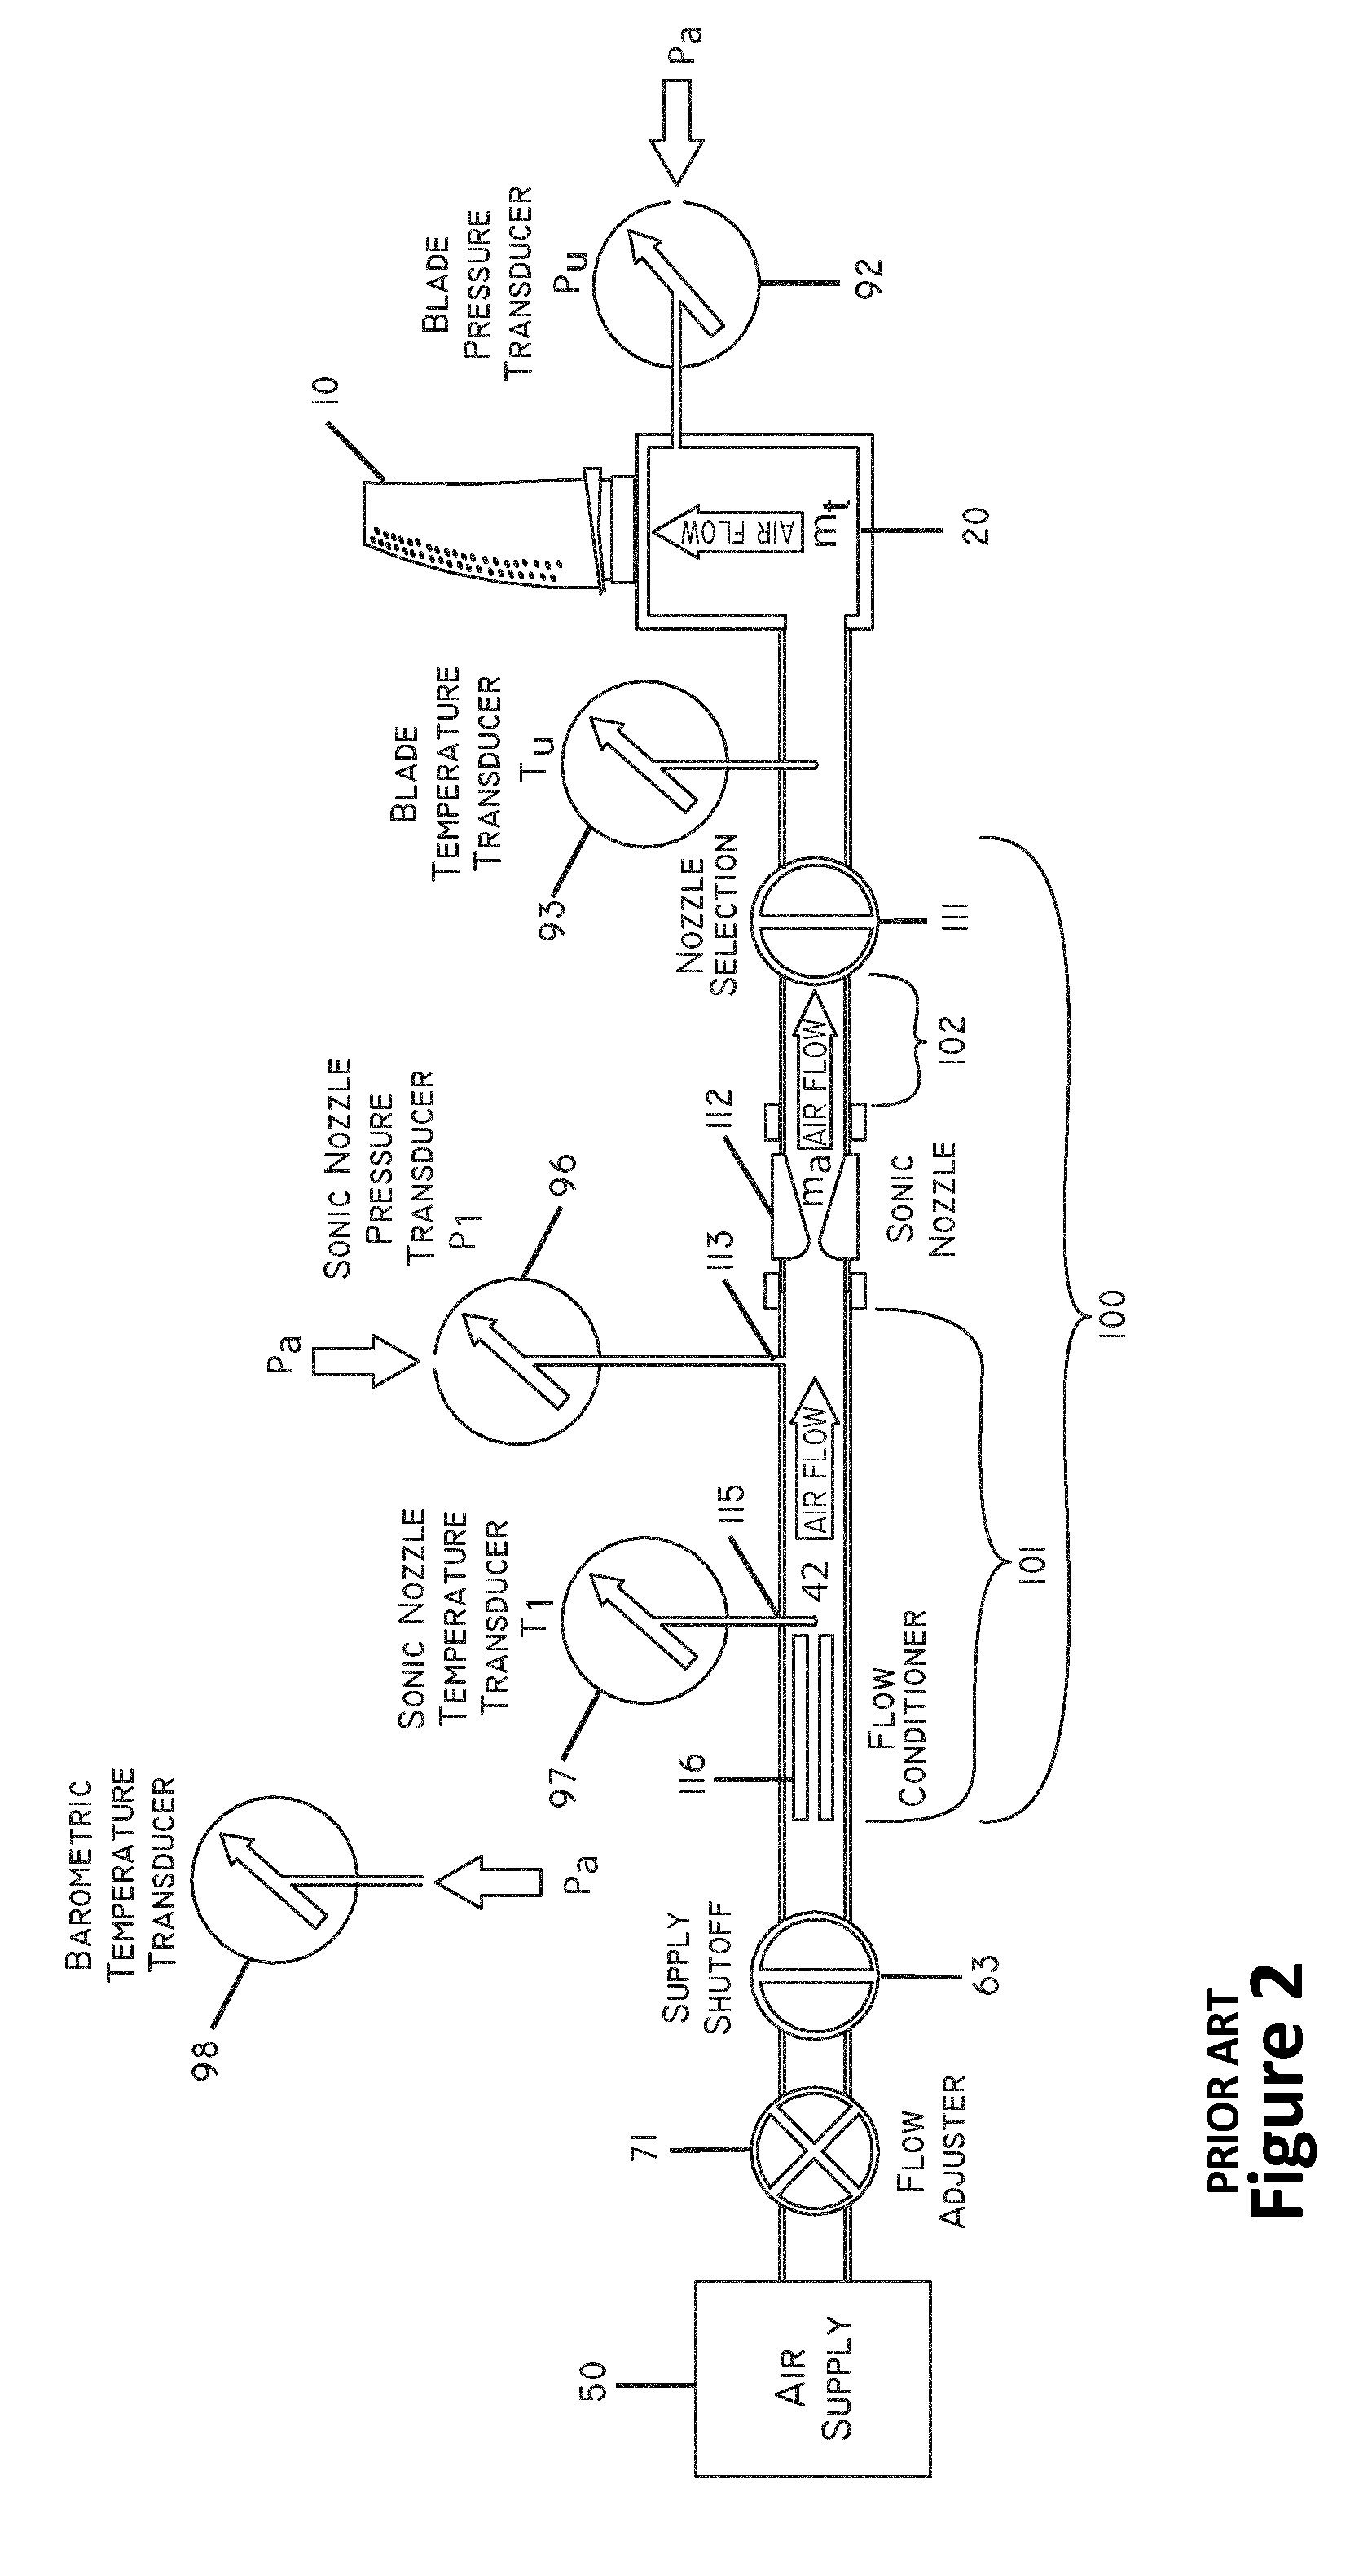 Apparatus and Method For Measurement of the Film Cooling Effect Produced By Air Cooled Gas Turbine Components